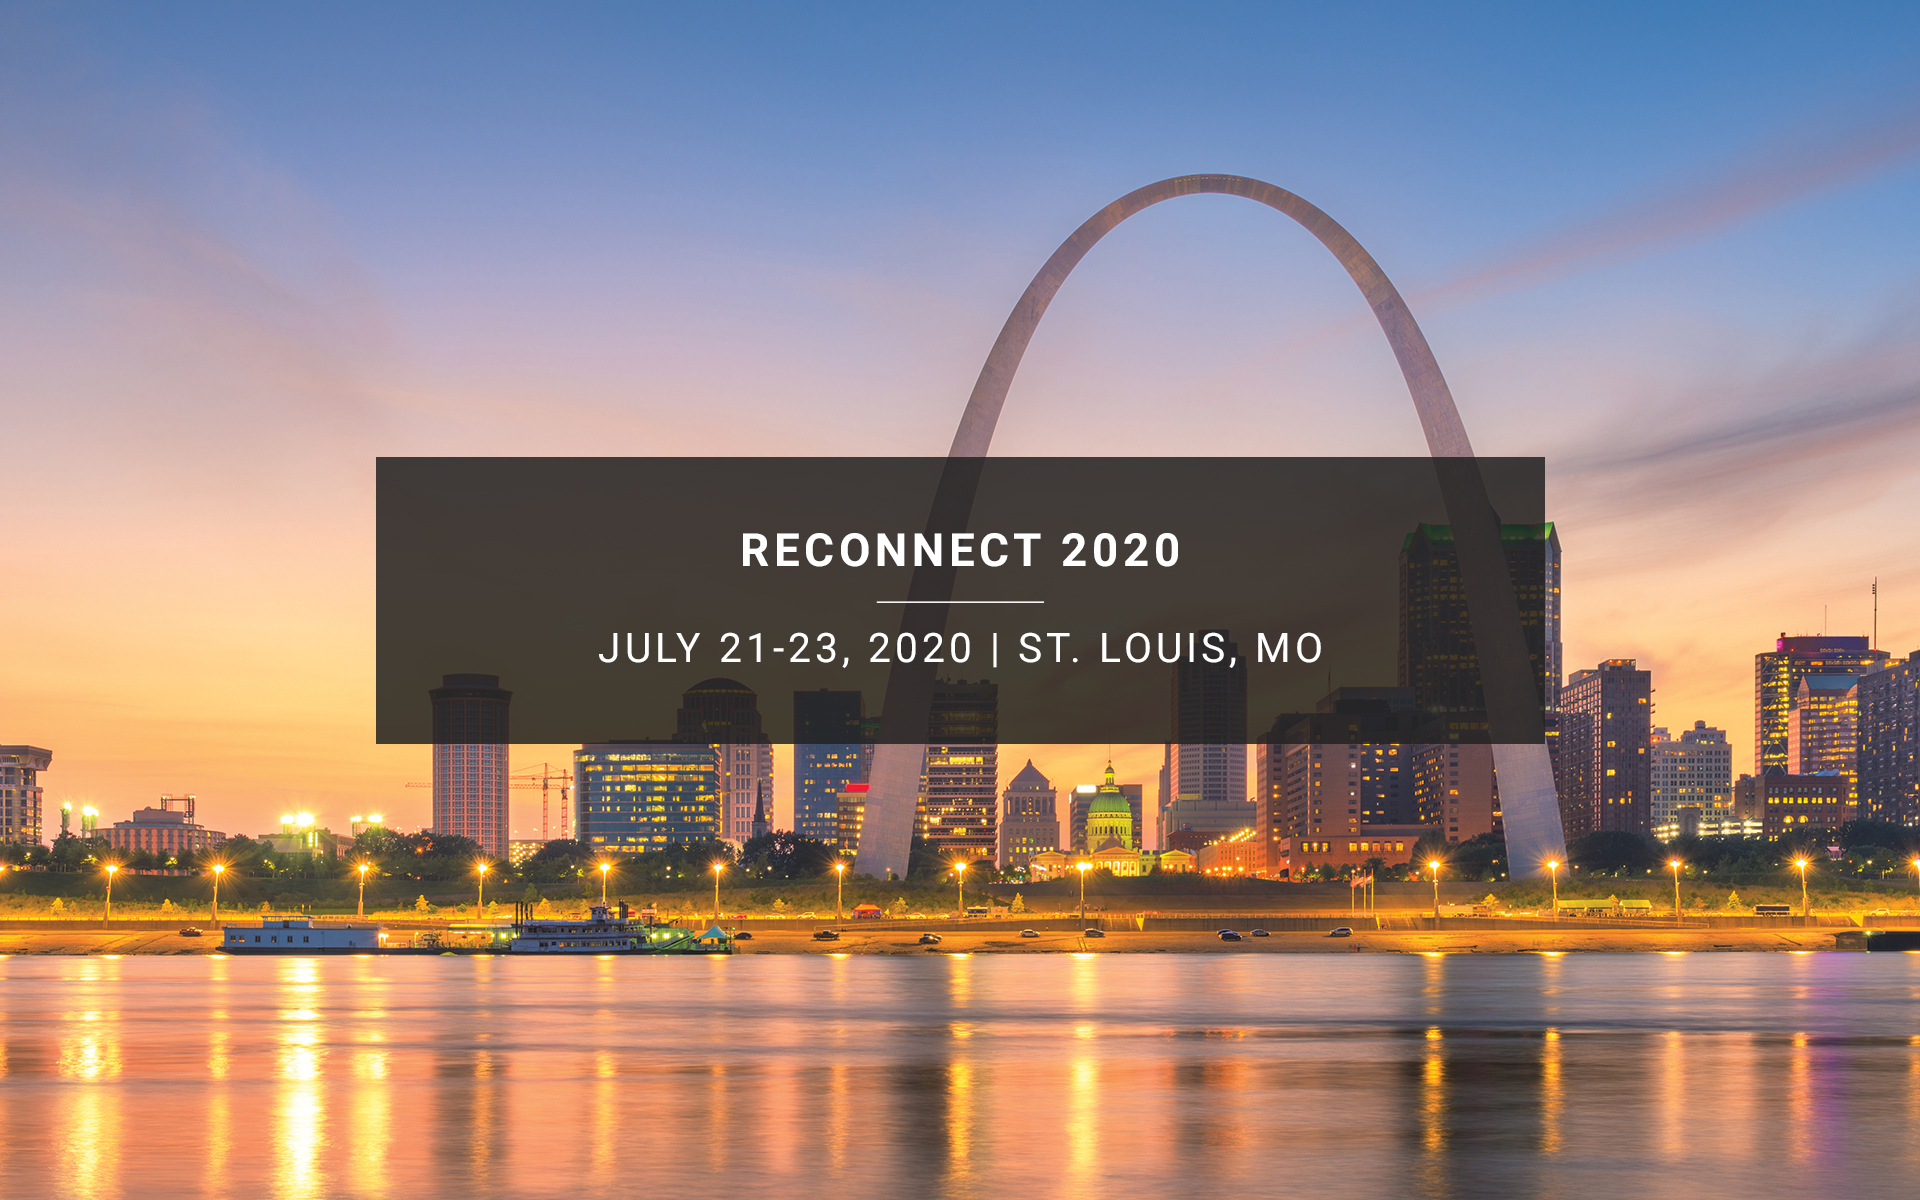 RECONNECT 2020 Event | New Resources Consulting